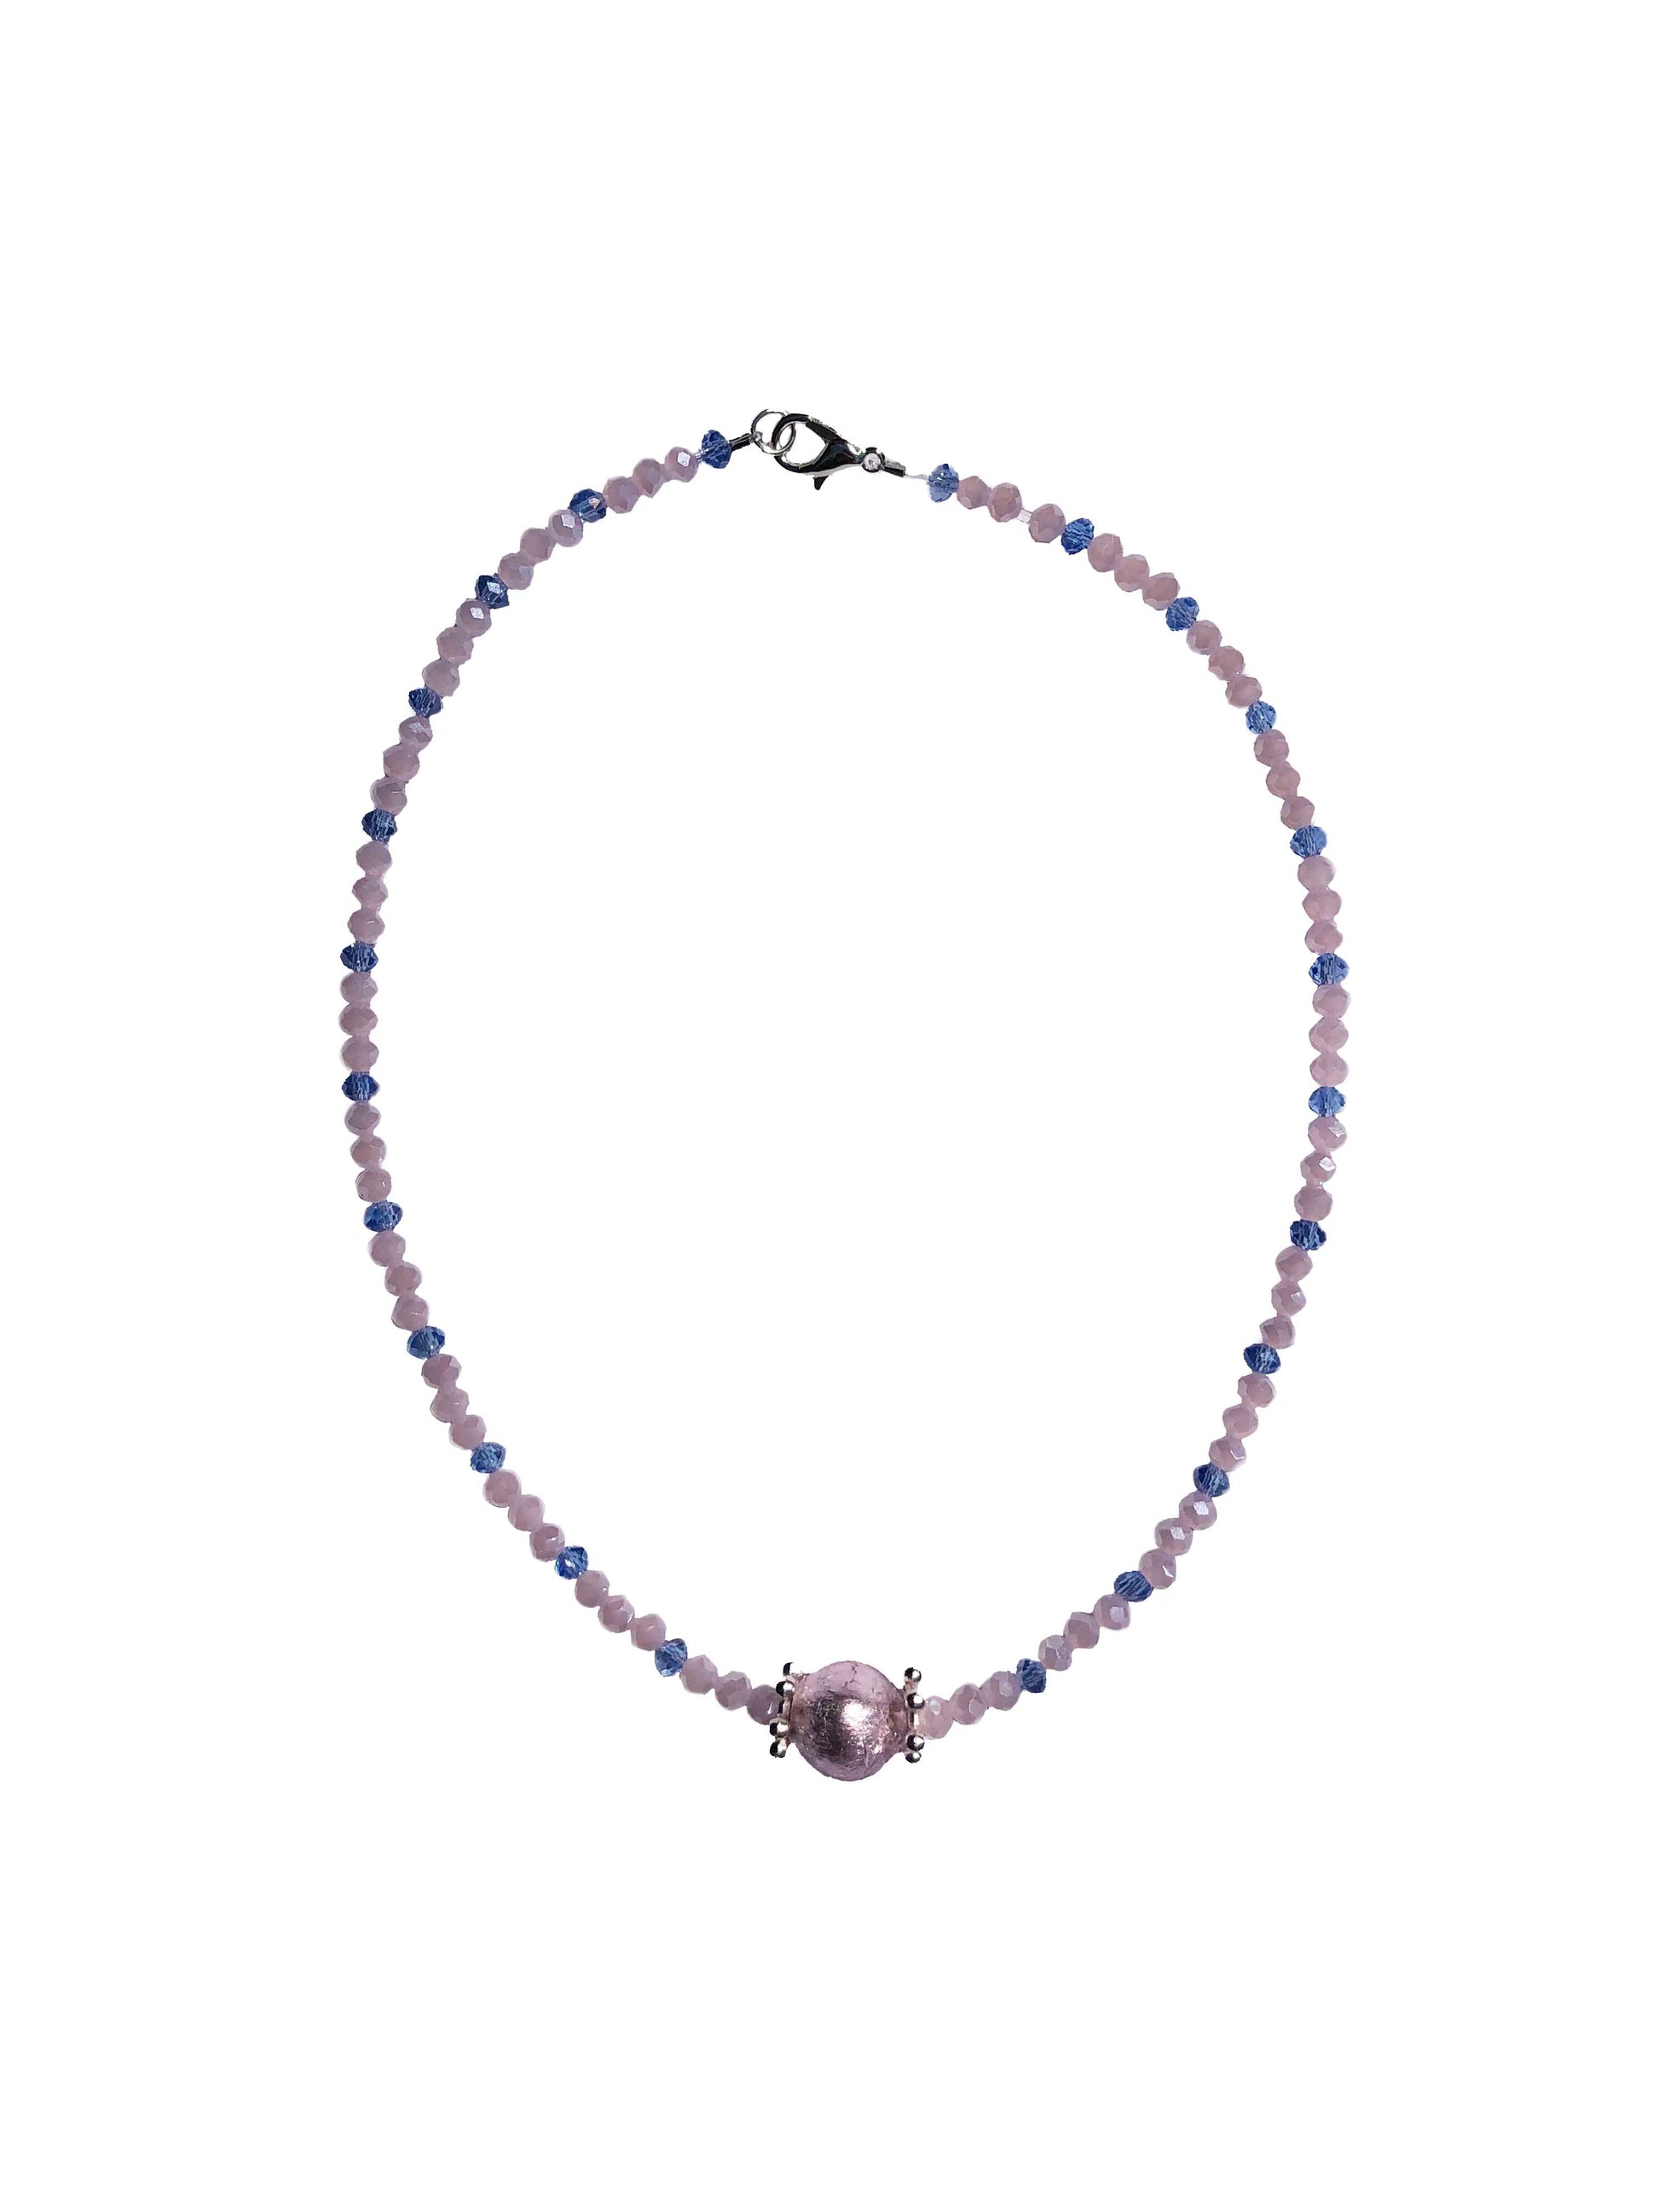 handcrafted pink and blue crystal beaded necklace with paper mache charm.